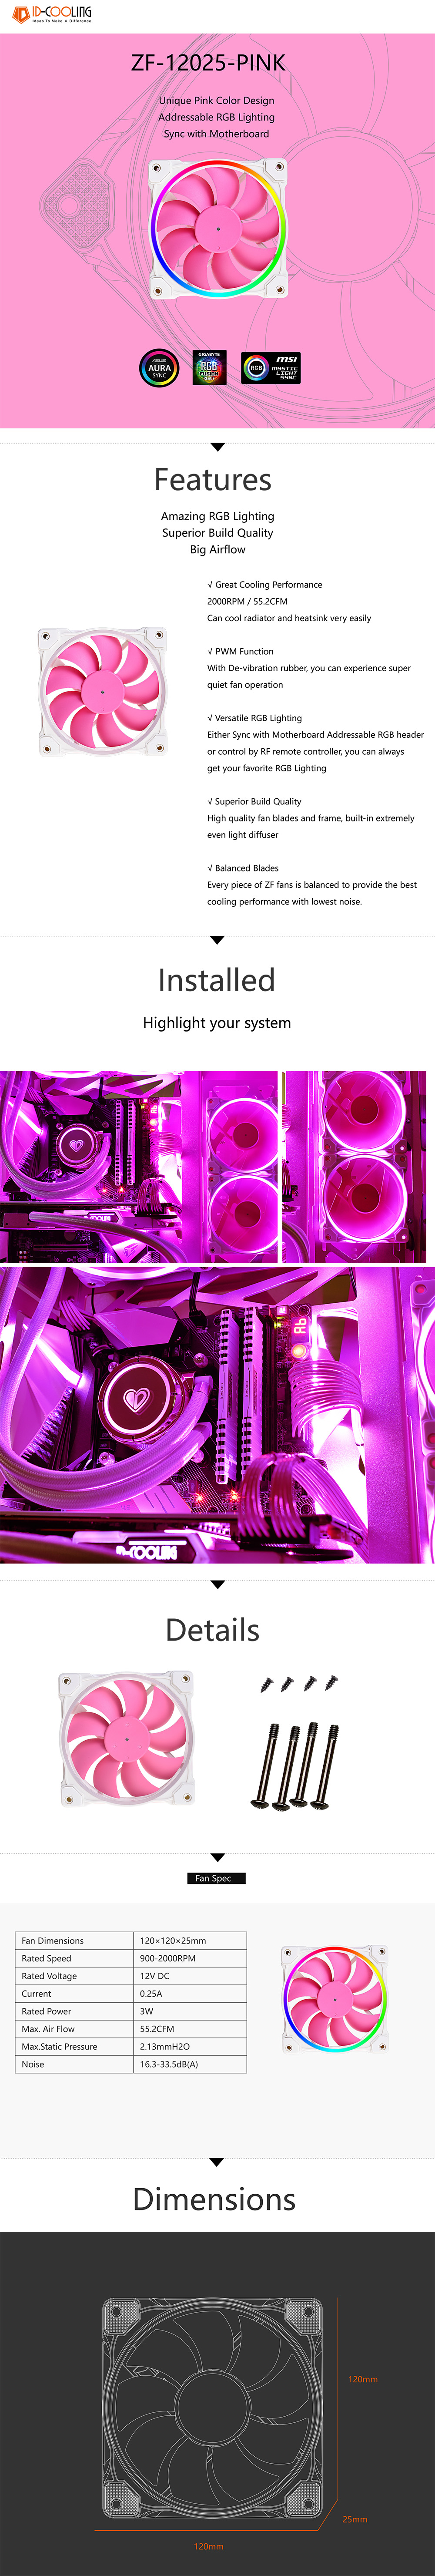 A large marketing image providing additional information about the product ID-COOLING ZF Series 120mm ARGB Case Fan - Pink - Additional alt info not provided